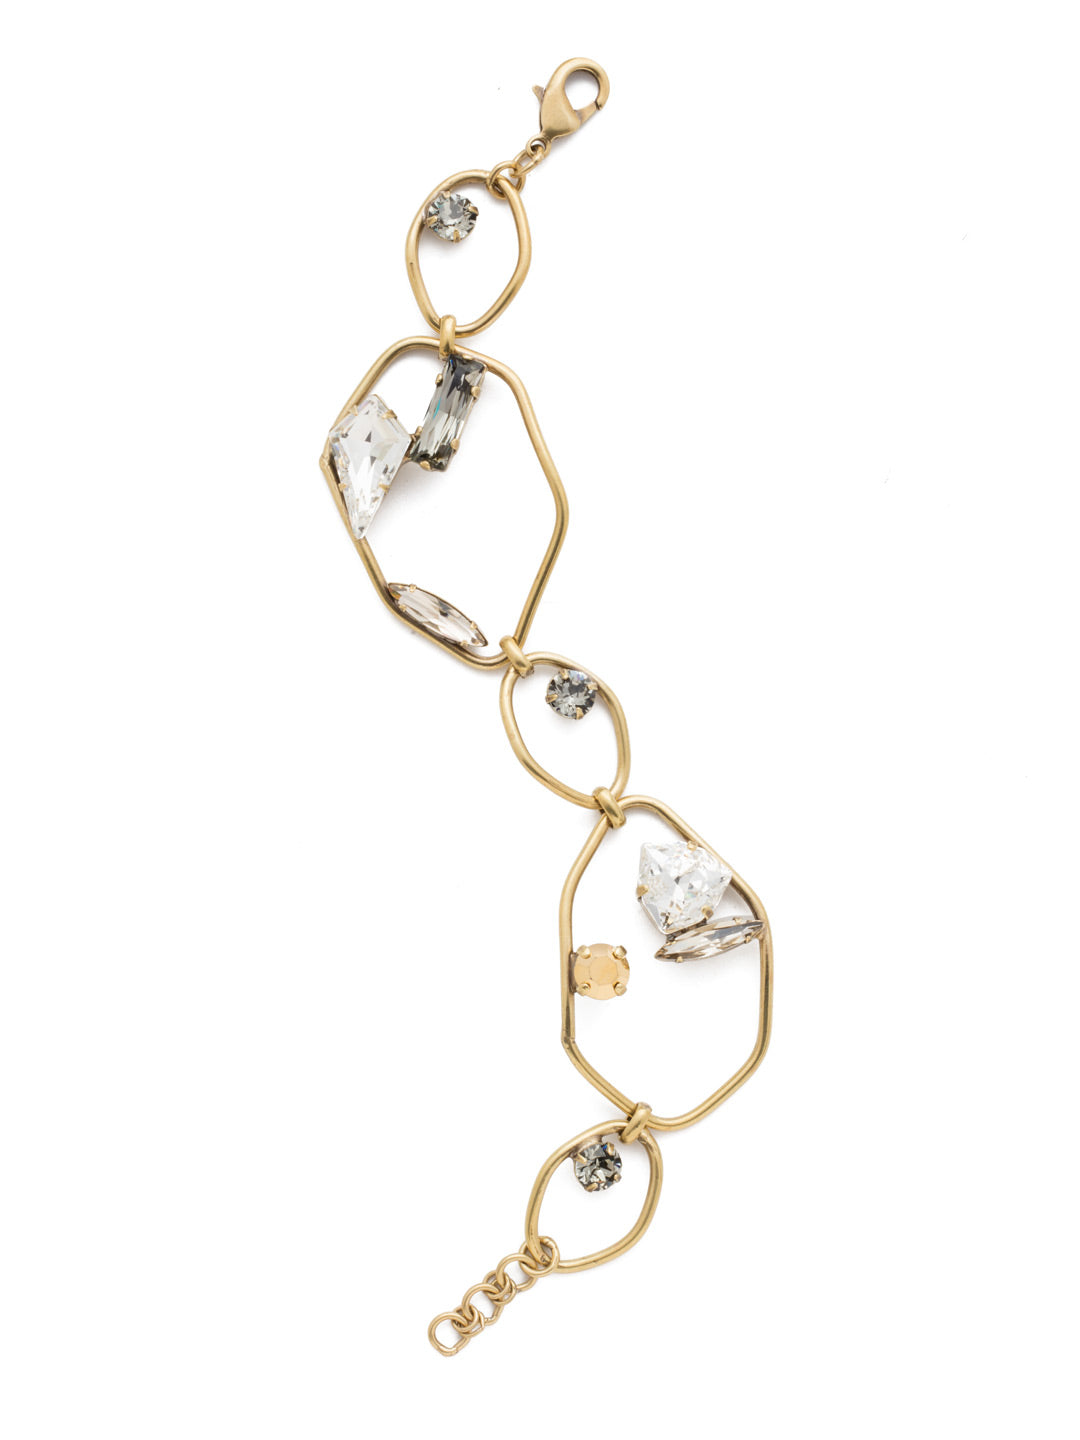 Anastasia Statement Bracelet - BEB12AGCRY - A modern, artistic and high-fashion twist on a classic piece. This bracelet features an open-link chain design with small multi-cut geometric stones bordering the insides. From Sorrelli's Crystal collection in our Antique Gold-tone finish.